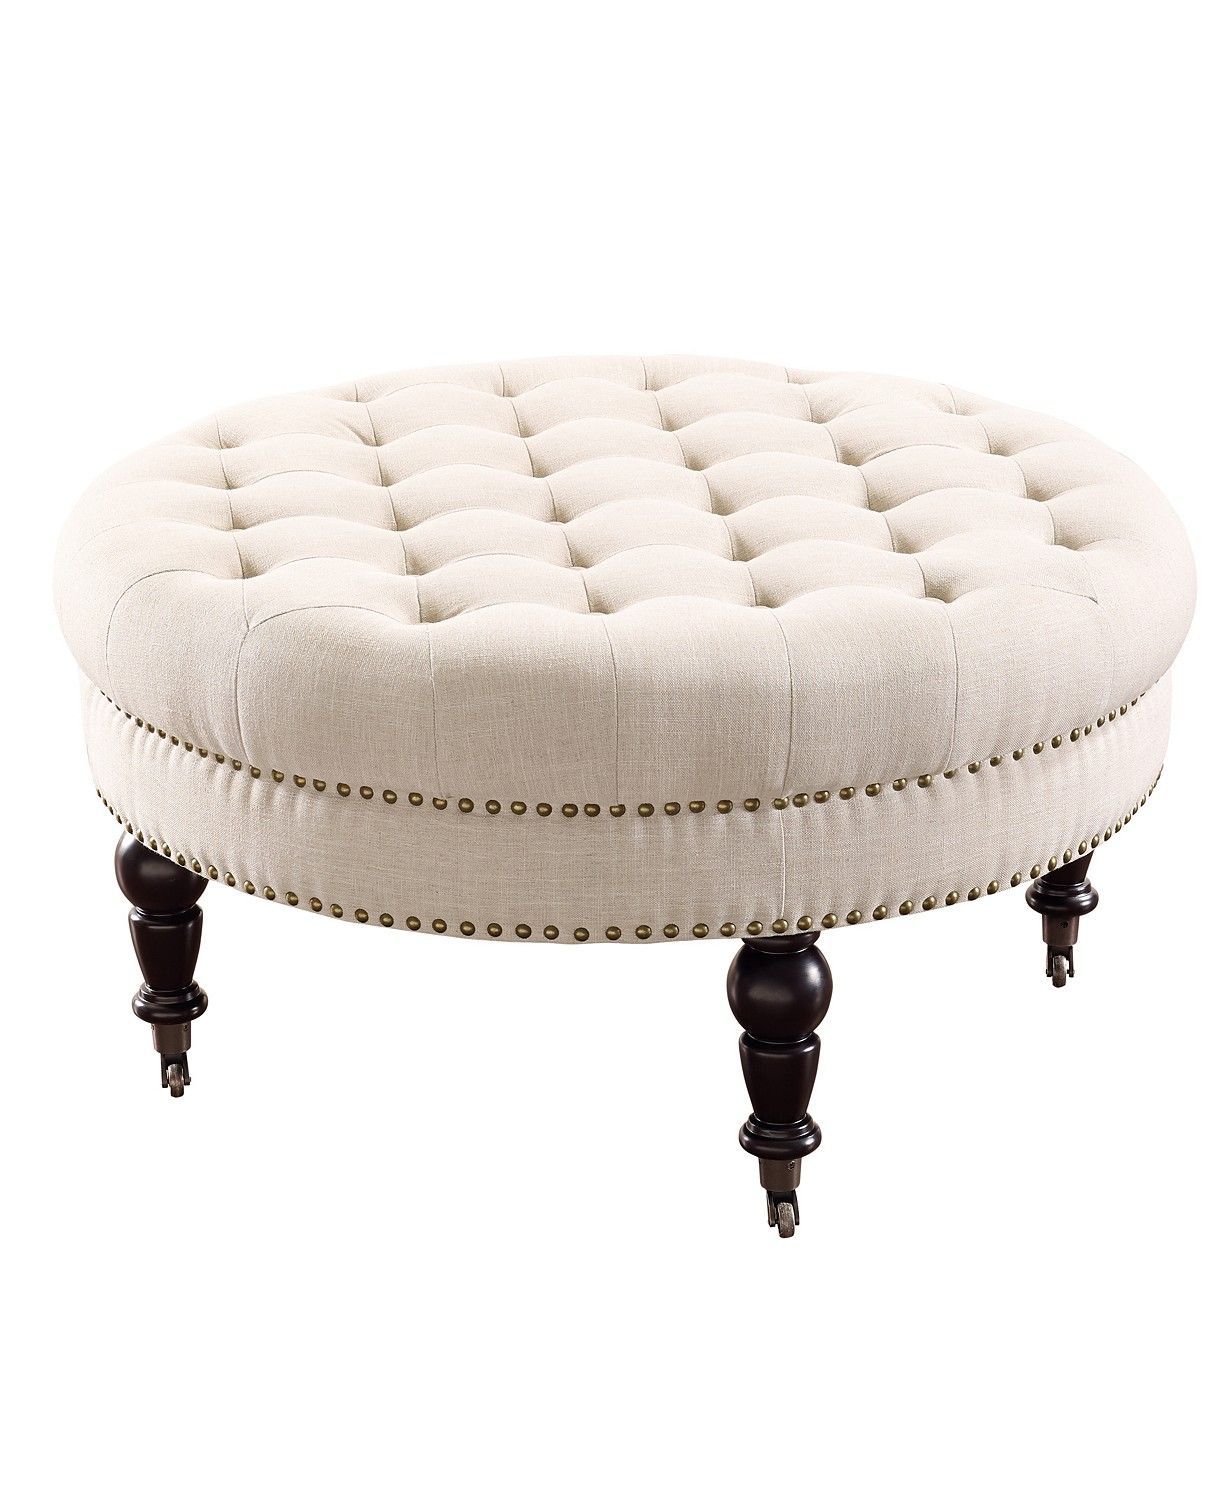 Linon Home Décor Isabelle Round Tufted Ottoman & Reviews – Furniture With Regard To Bronze Steel Tufted Square Ottomans (View 10 of 20)